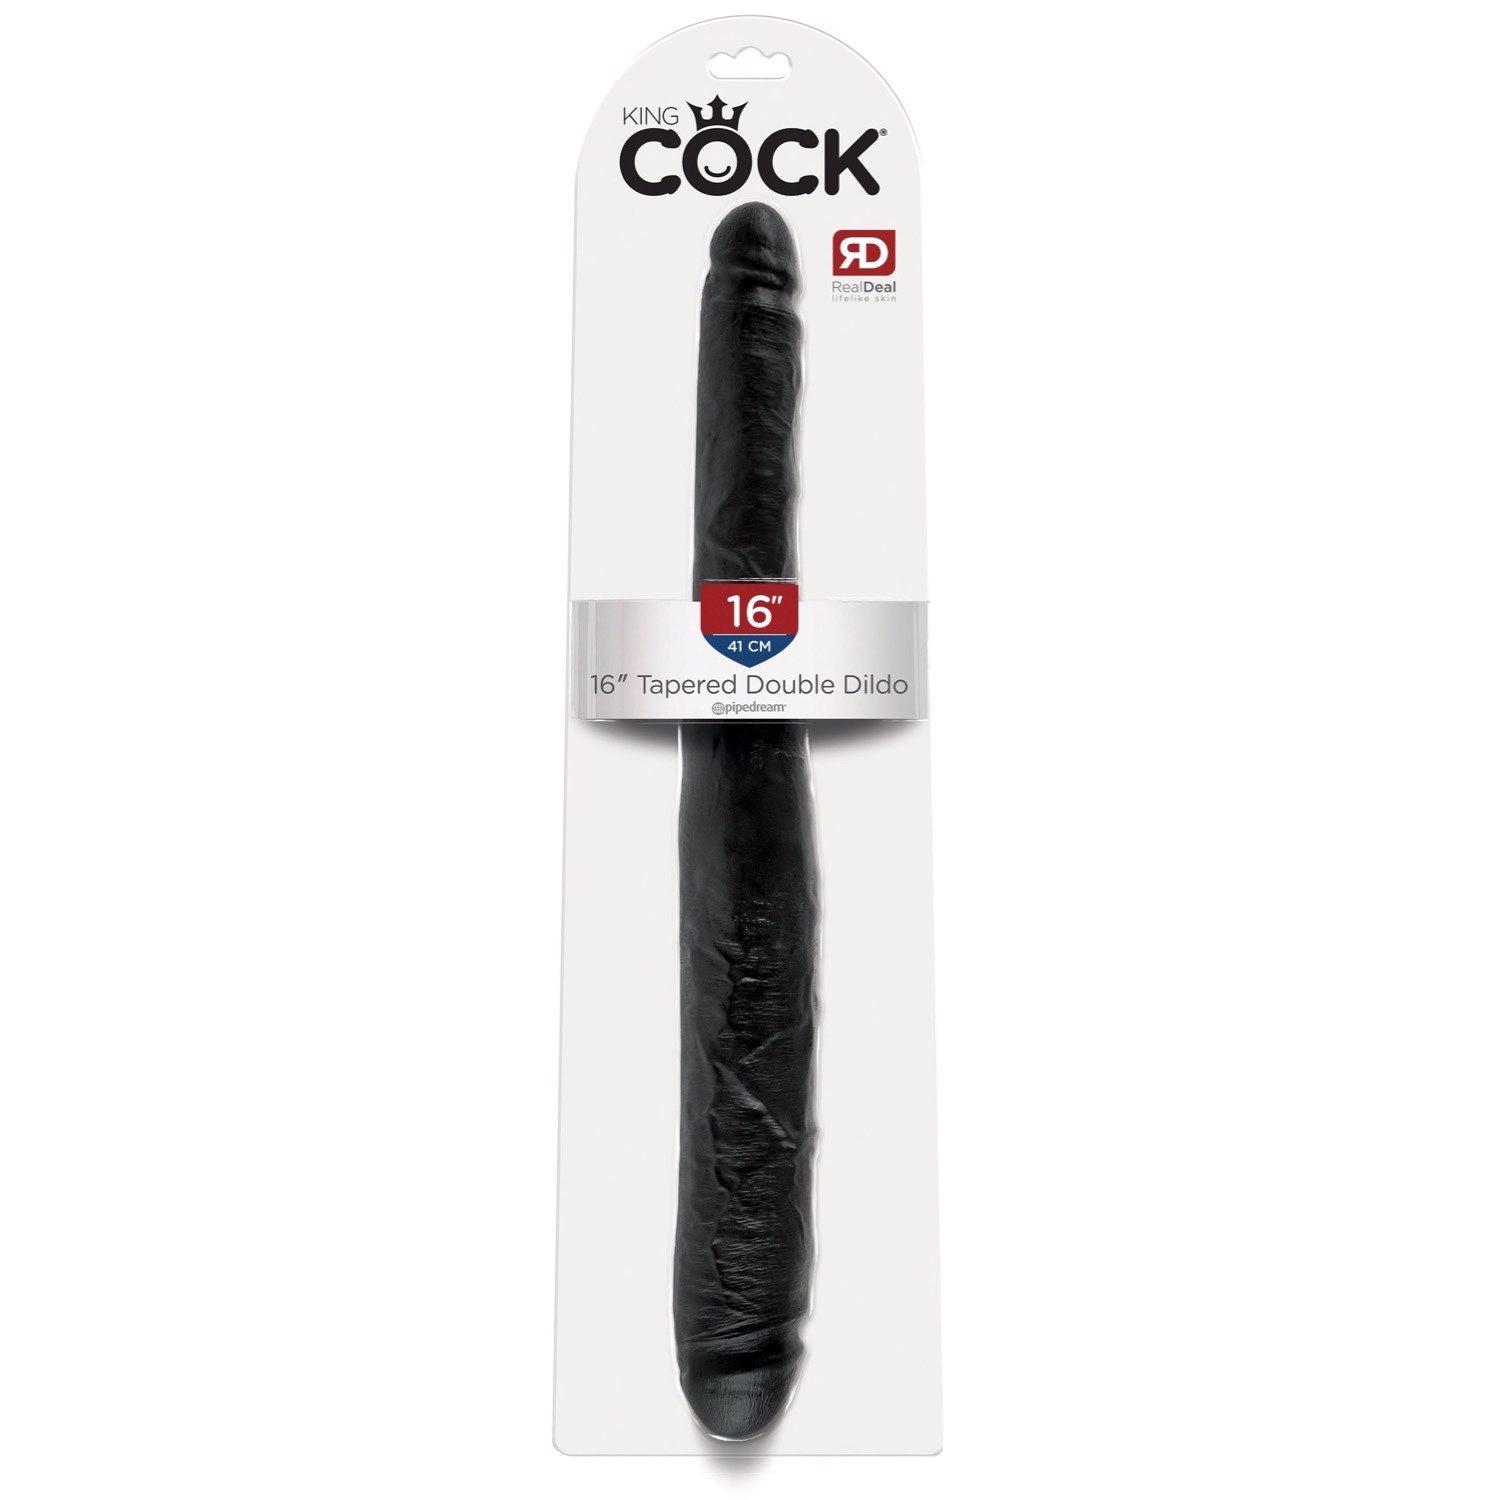 King Cock 16&quot; Tapered Double Dildo - Black 40.6 cm (16&quot;) Double Dong by Pipedream